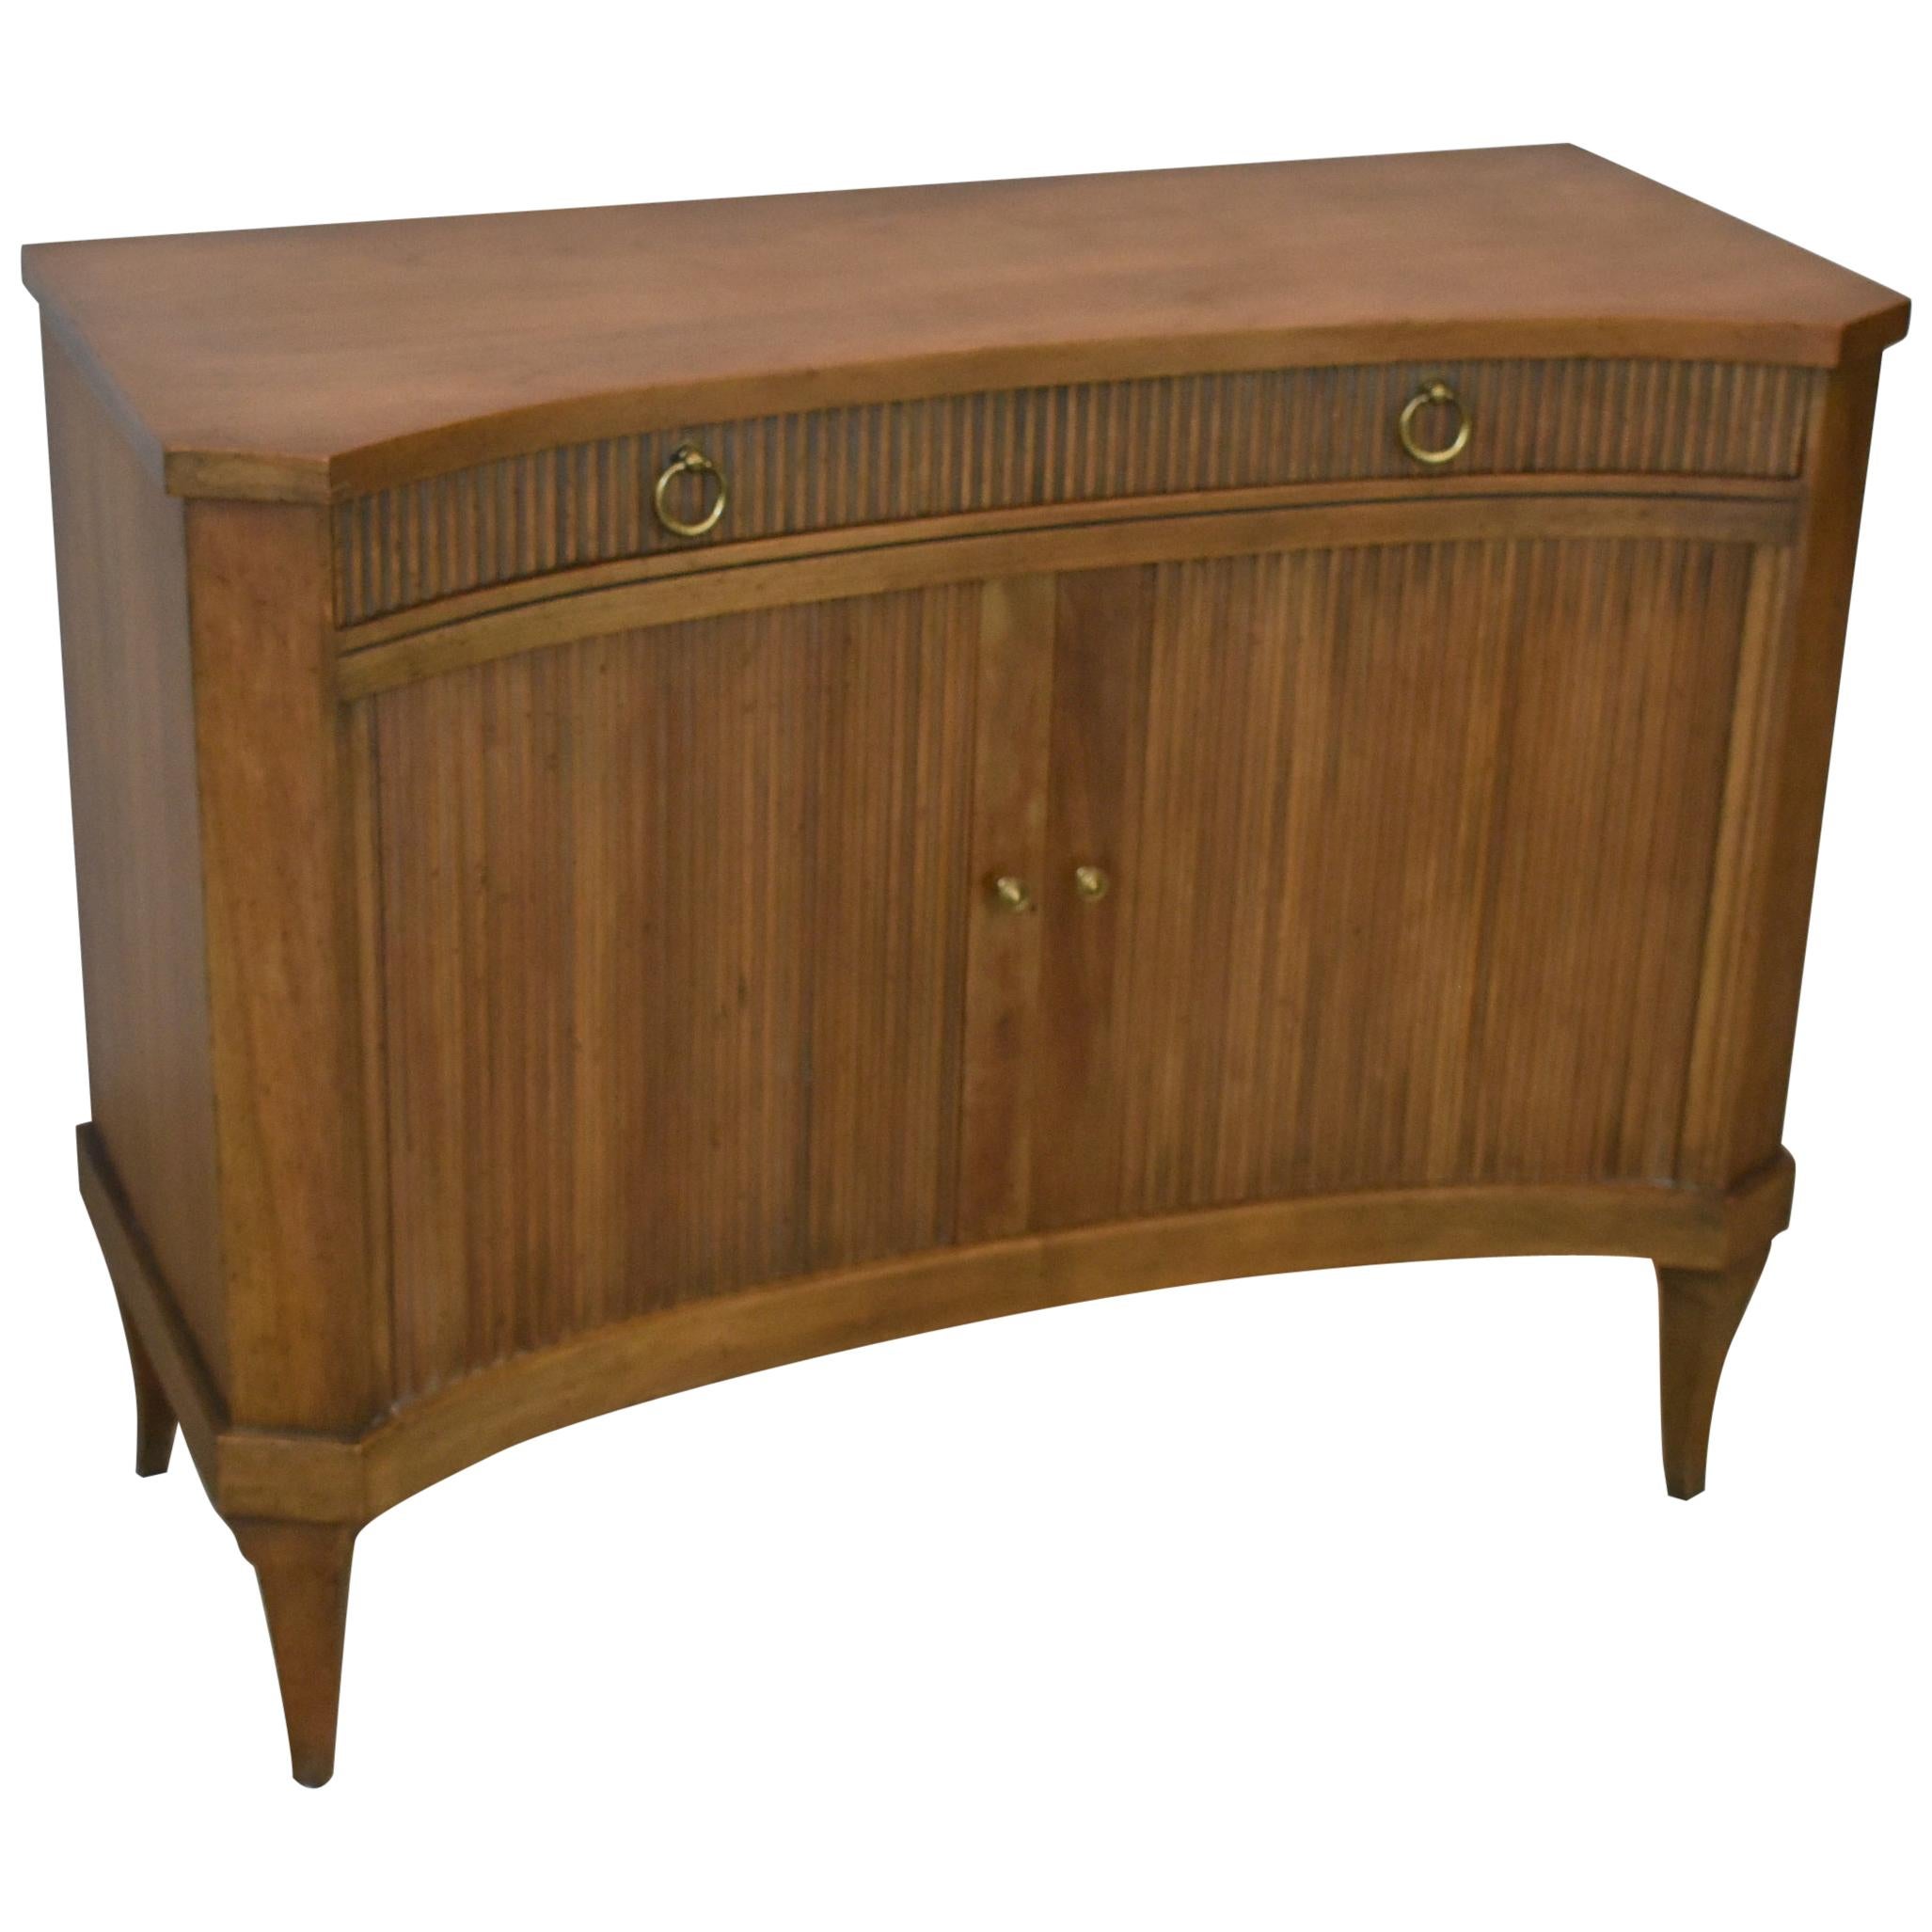 Baker Furniture Cherry Regency Style Commode / Chest with Tambour Doors